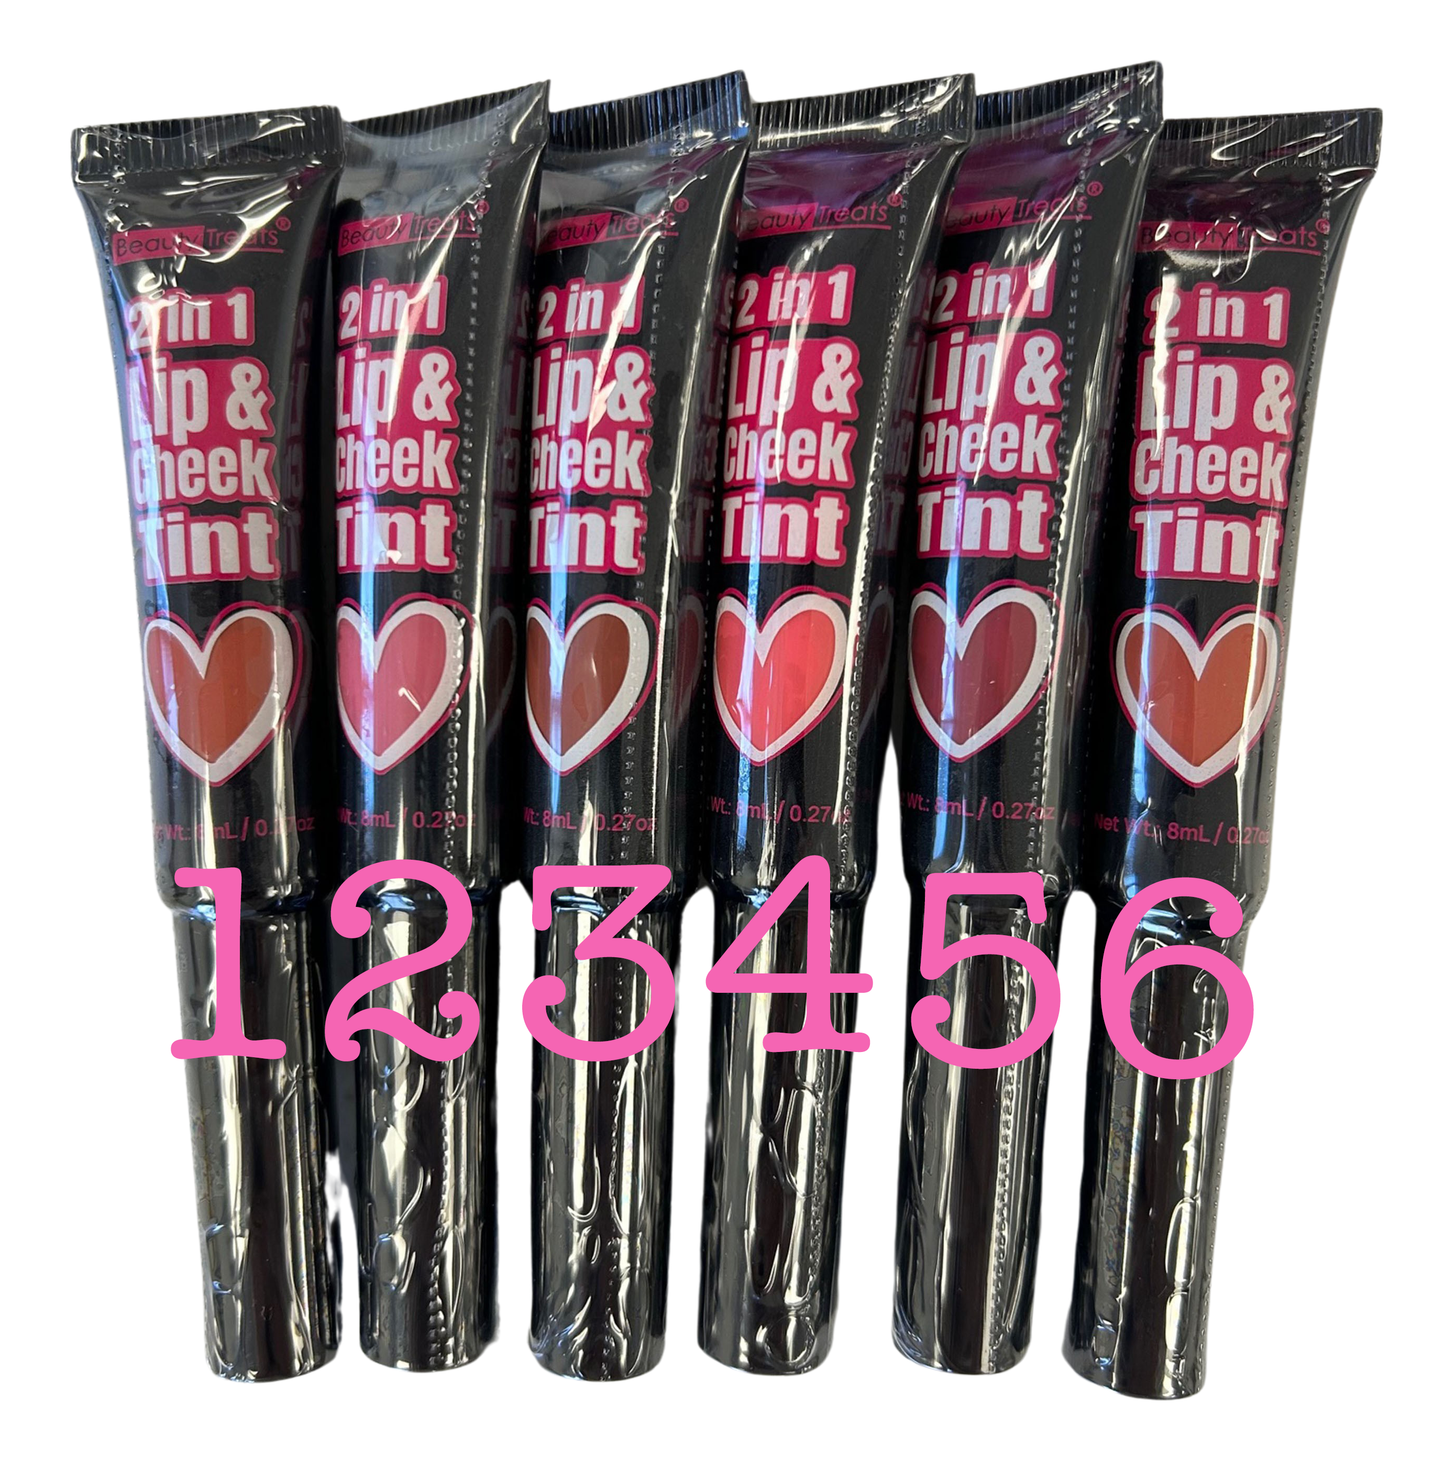 2 In 1 Lip & Cheek Buildable Tint - In 6 Shades